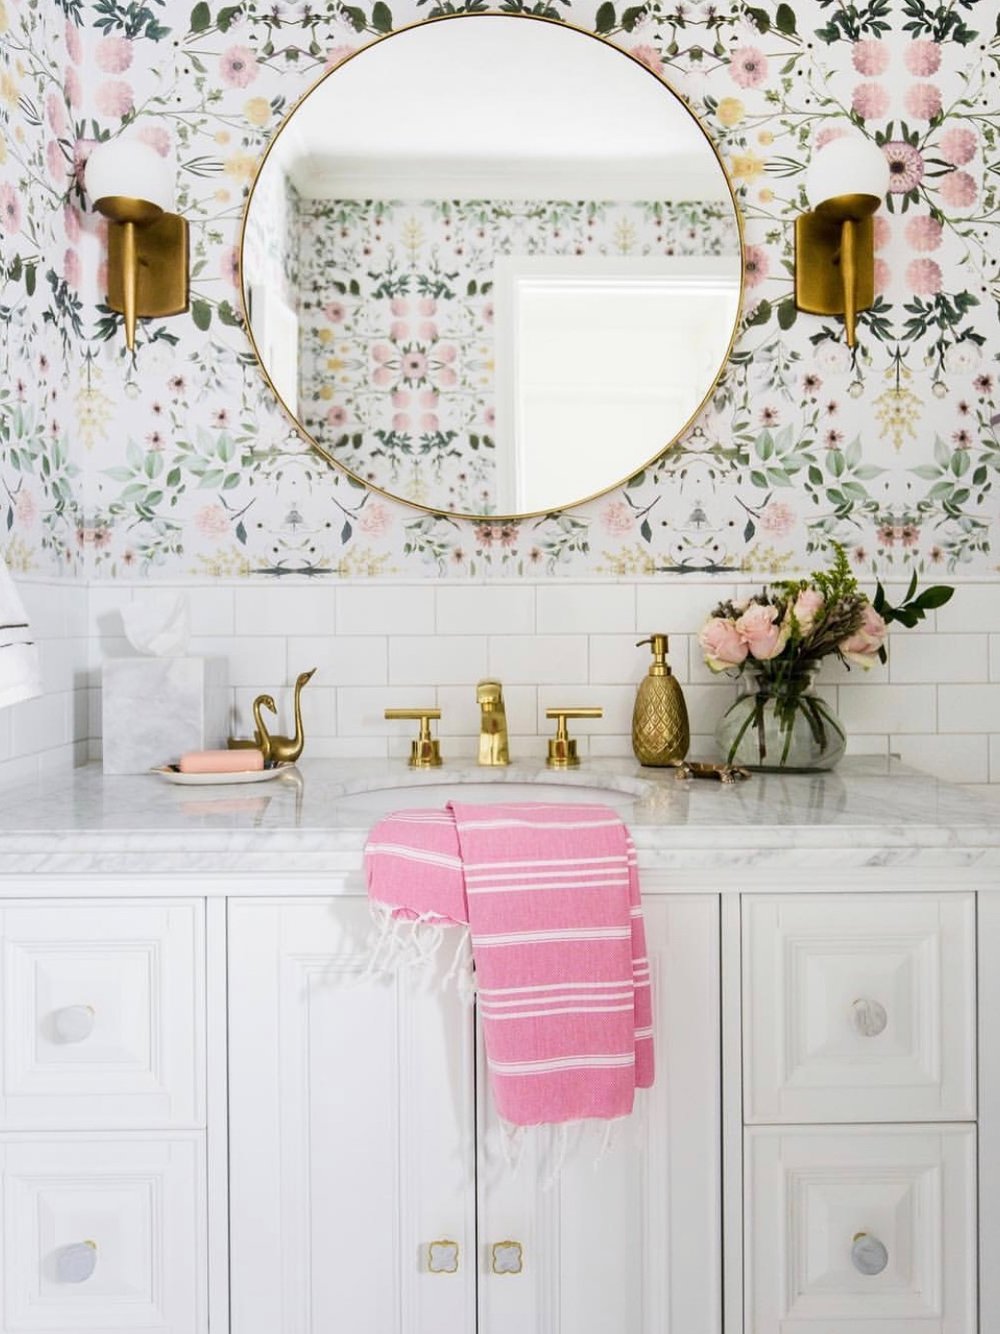 Fancy favorites: 6 rooms with floral wallpaper that will knock your socks  off — ASHLINA KAPOSTA